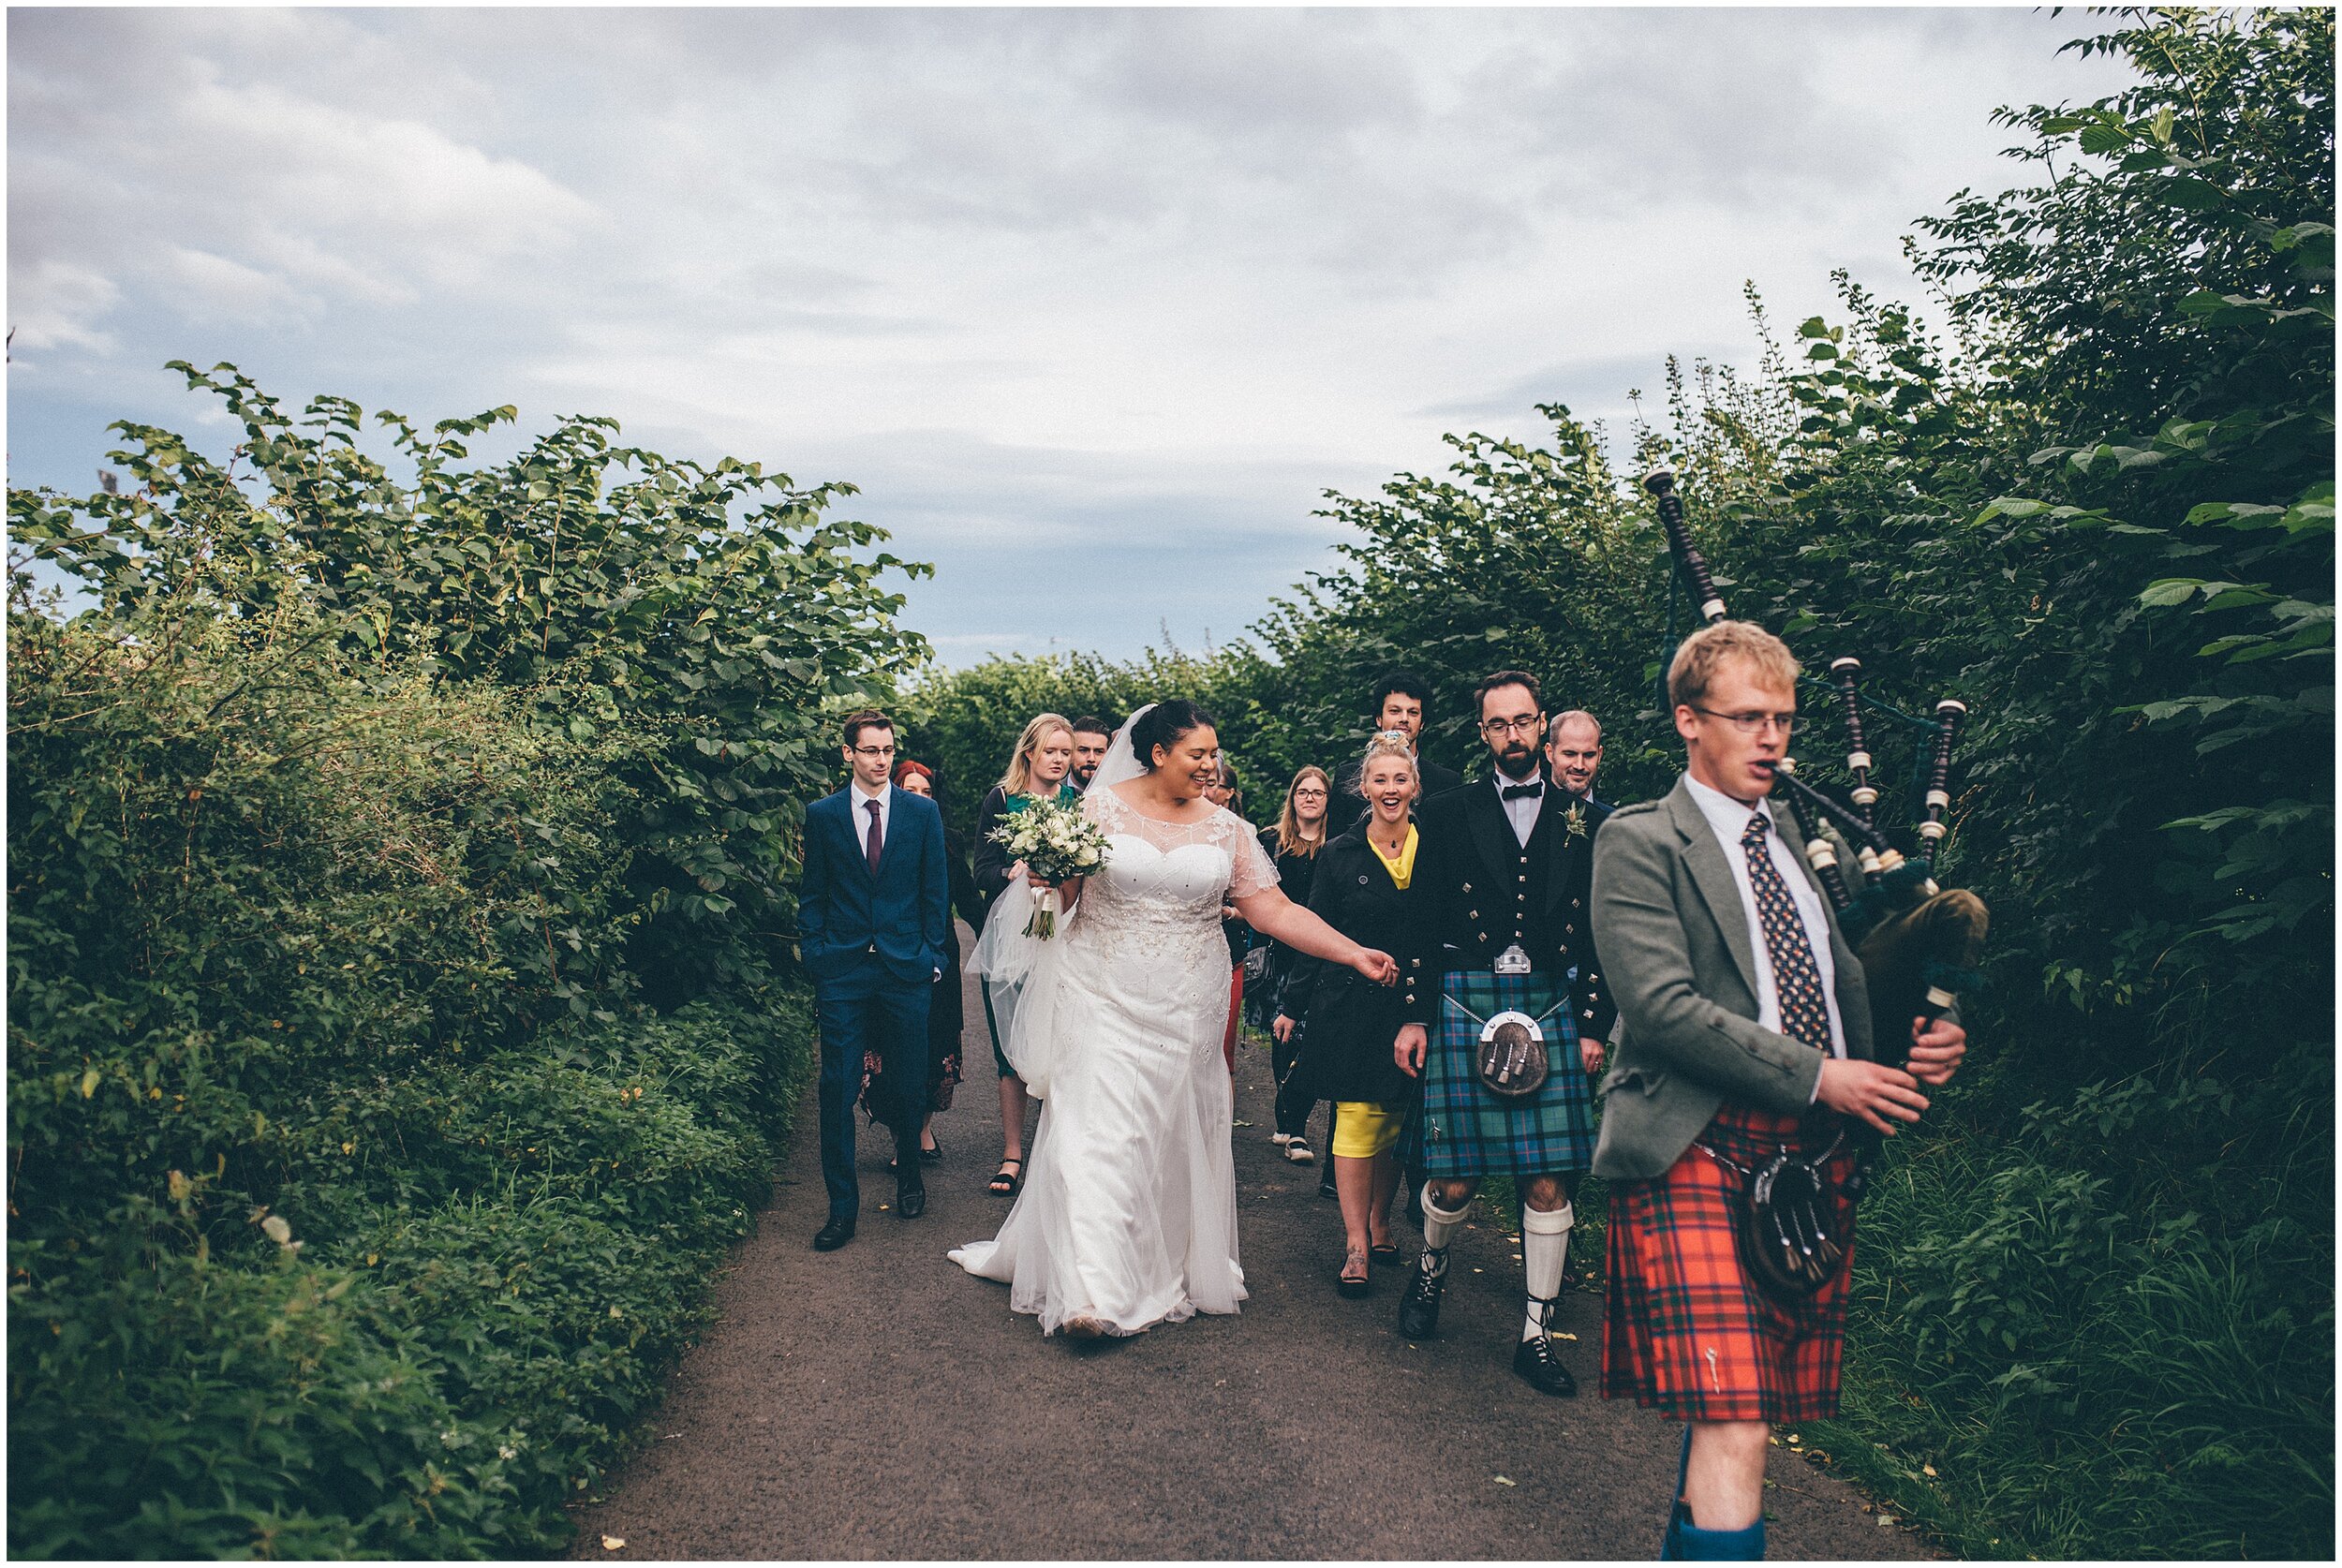 Bride and groom walk after their wedding through Melrose following a bagpipe player.